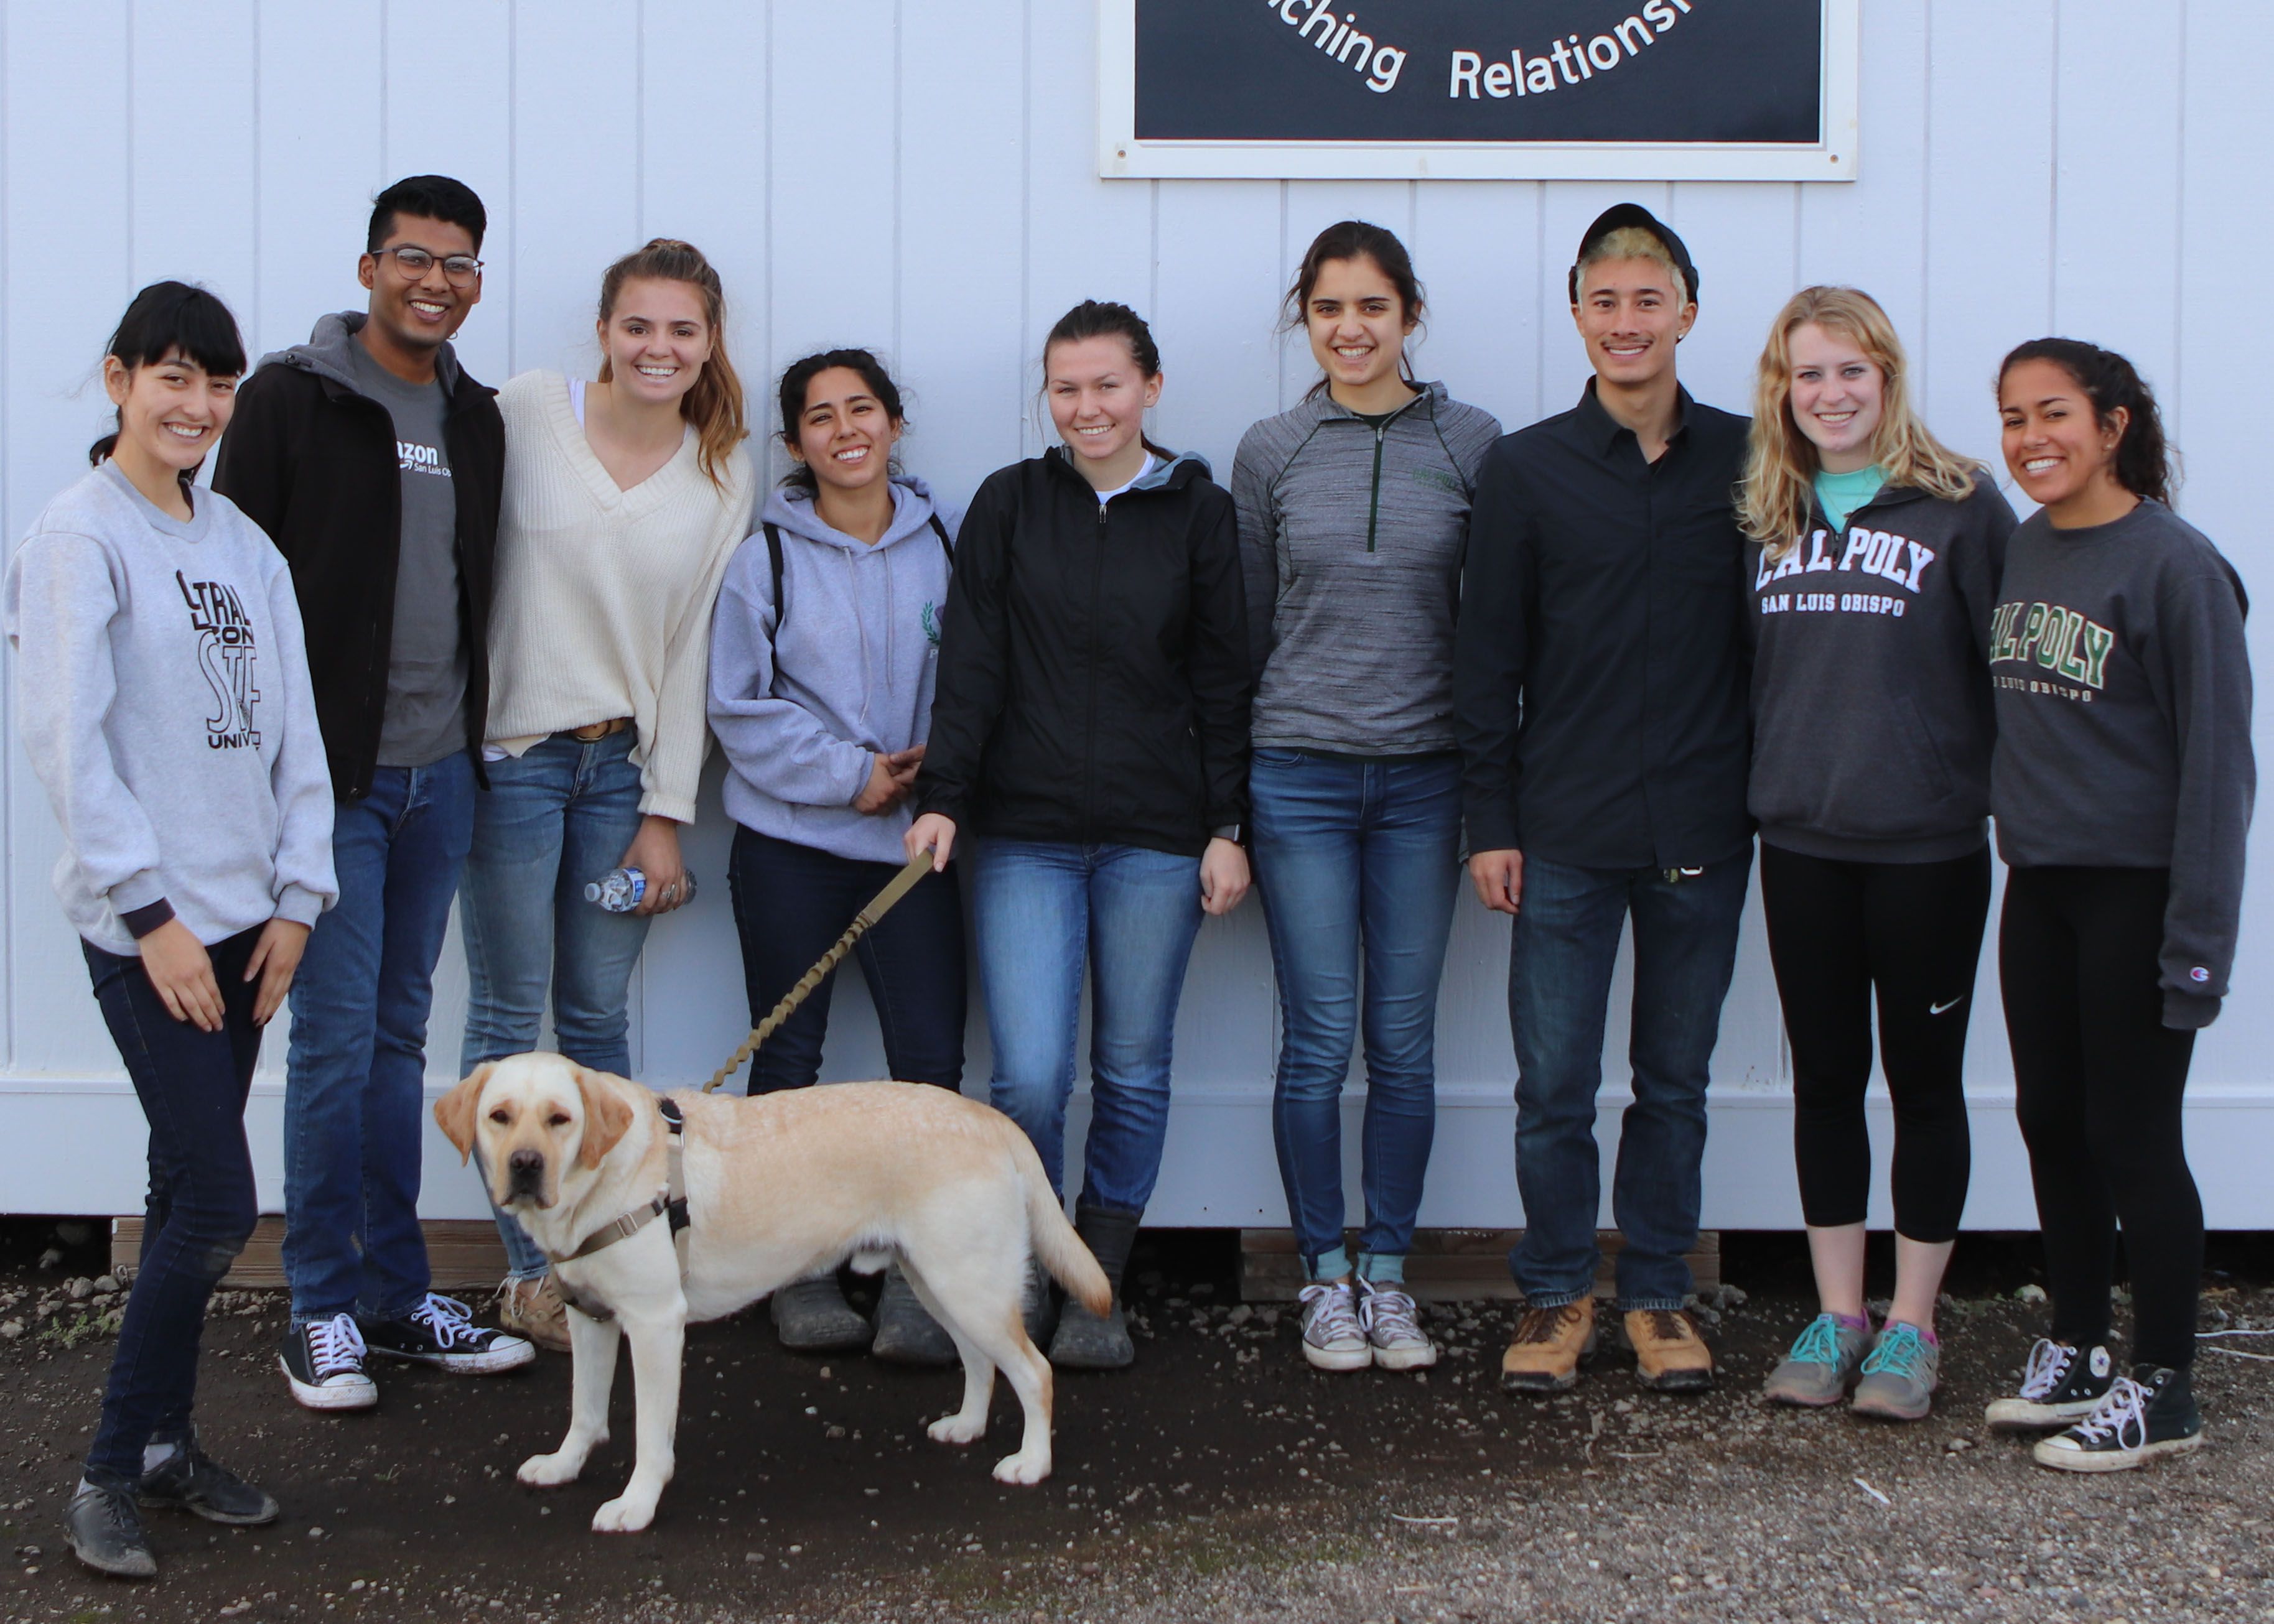 Thank you to the Cal Poly Make a Difference Month Student Volunteers!